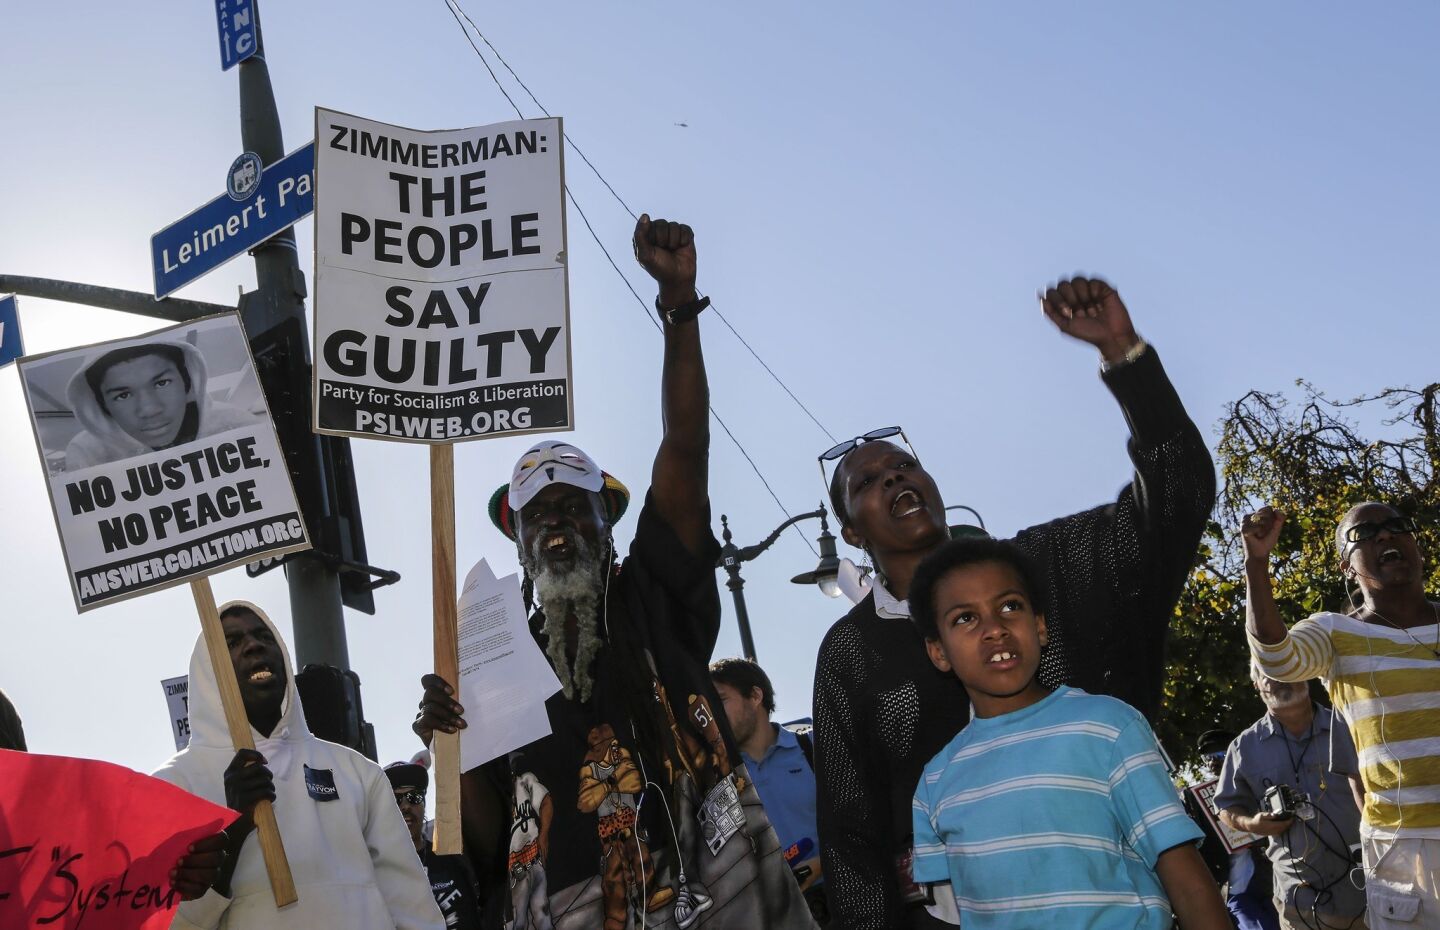 Participants chanting slogans during rally protesting the acquittal of George Zimmerman in the shooting death of Trayvon Martin, at Leimert Plaza Park on Monday.